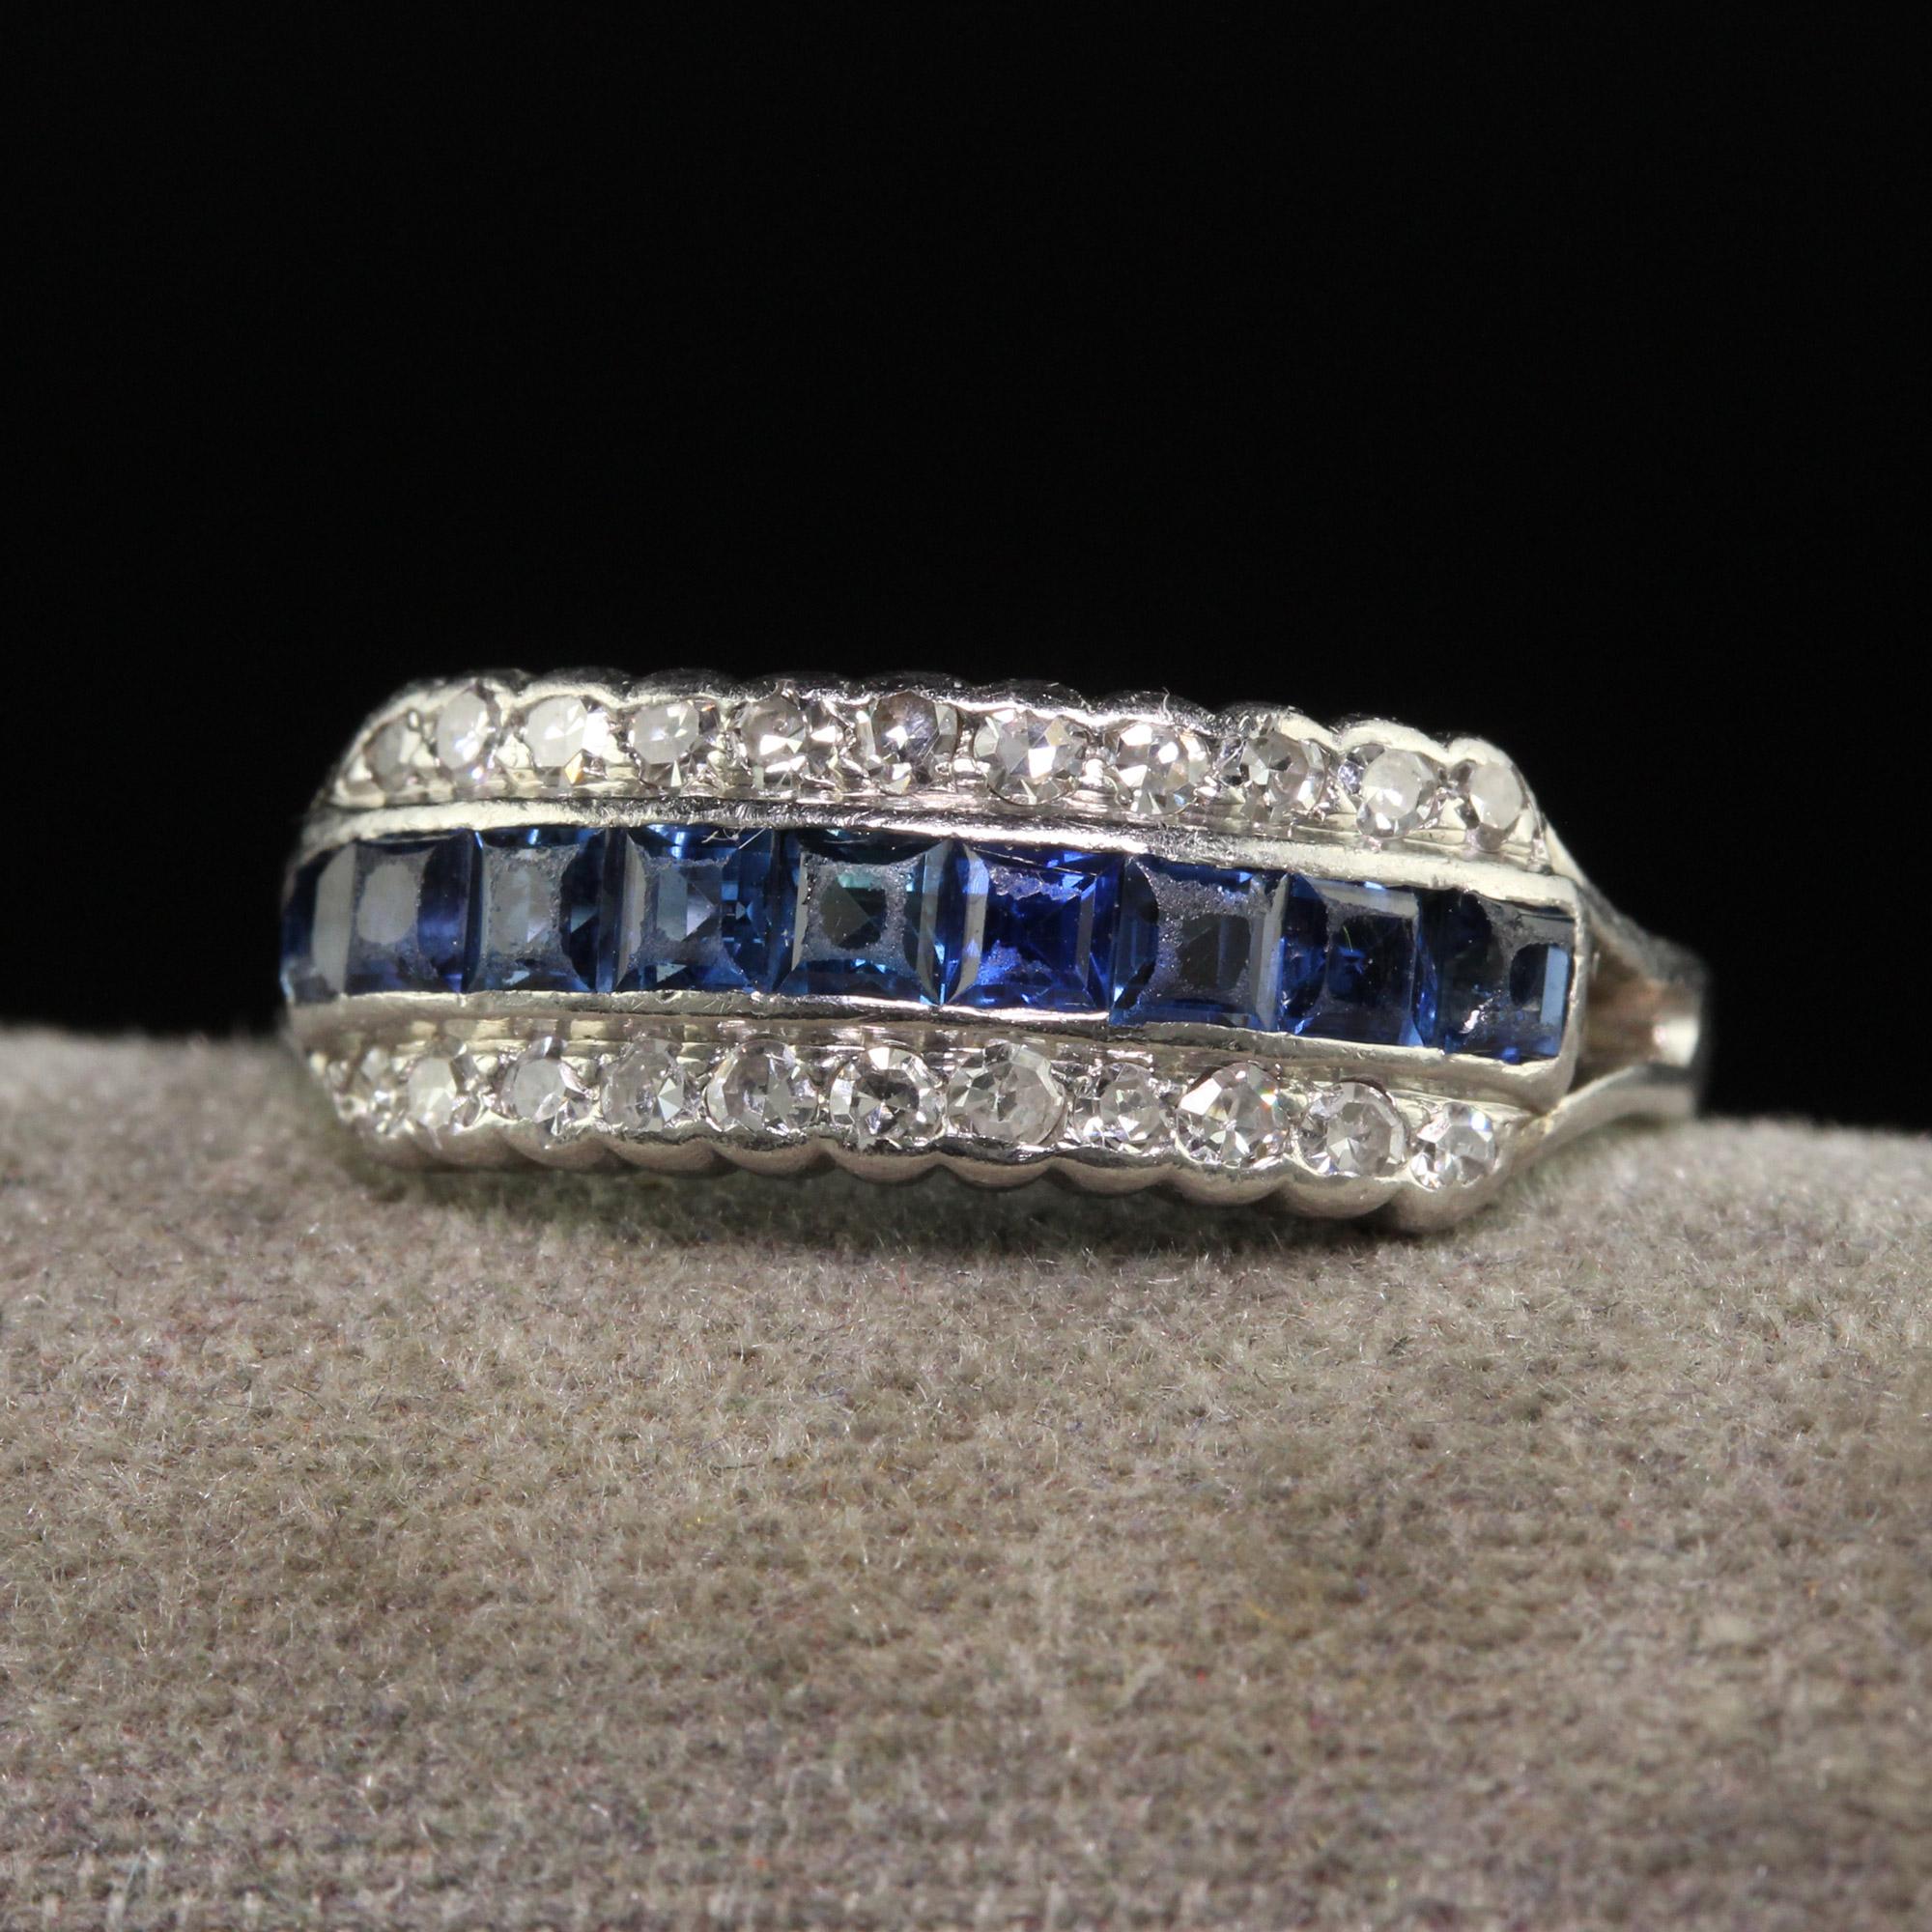 Beautiful Antique Art Deco Platinum Single Cut Diamond and Sapphire Three Row Band Ring. This beautiful art deco three row diamond and sapphire ring is crafted in platinum. The top of the ring has natural sapphires going halfway across the ring with